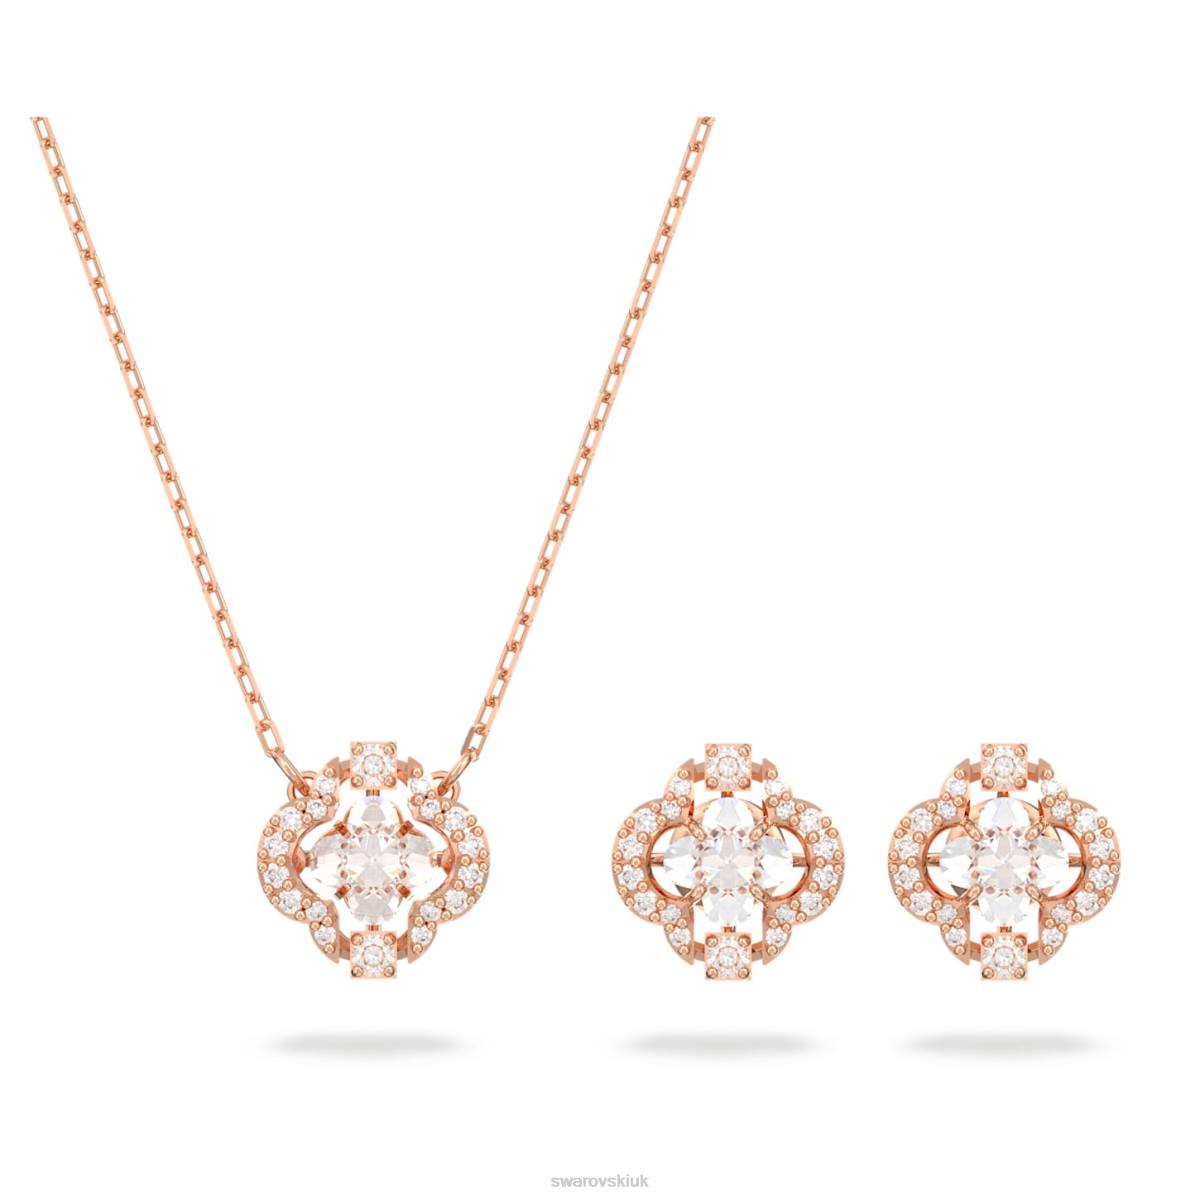 Jewelry Swarovski Sparkling Dance set Mixed cuts, Clover, White, Rose gold-tone plated 48JX411